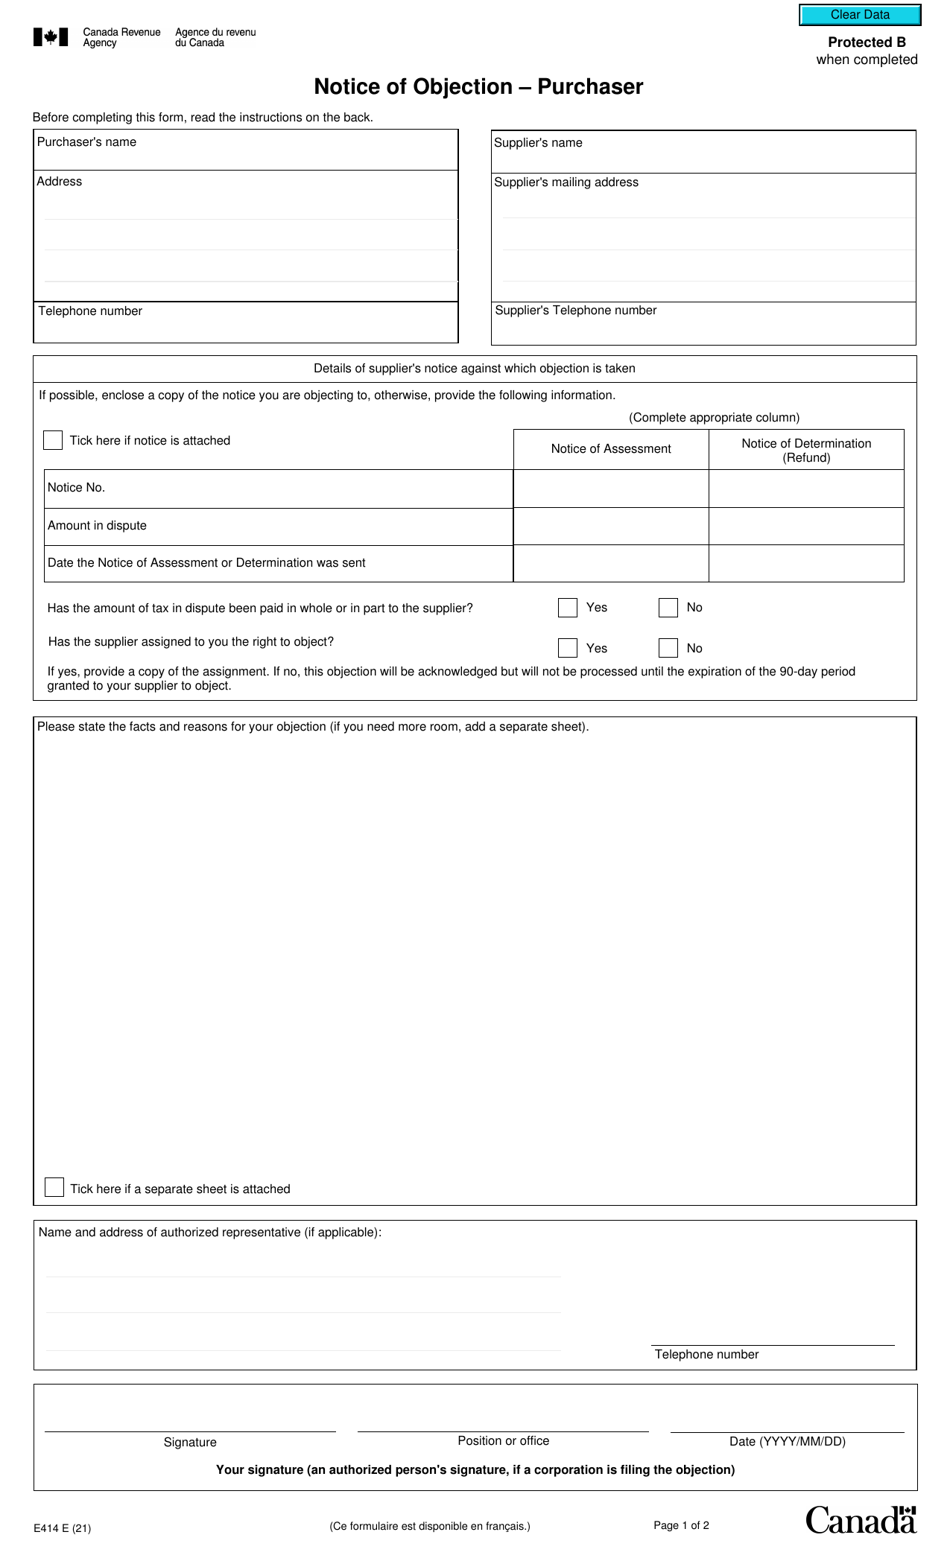 Form E414 Notice of Objection - Purchaser - Canada, Page 1